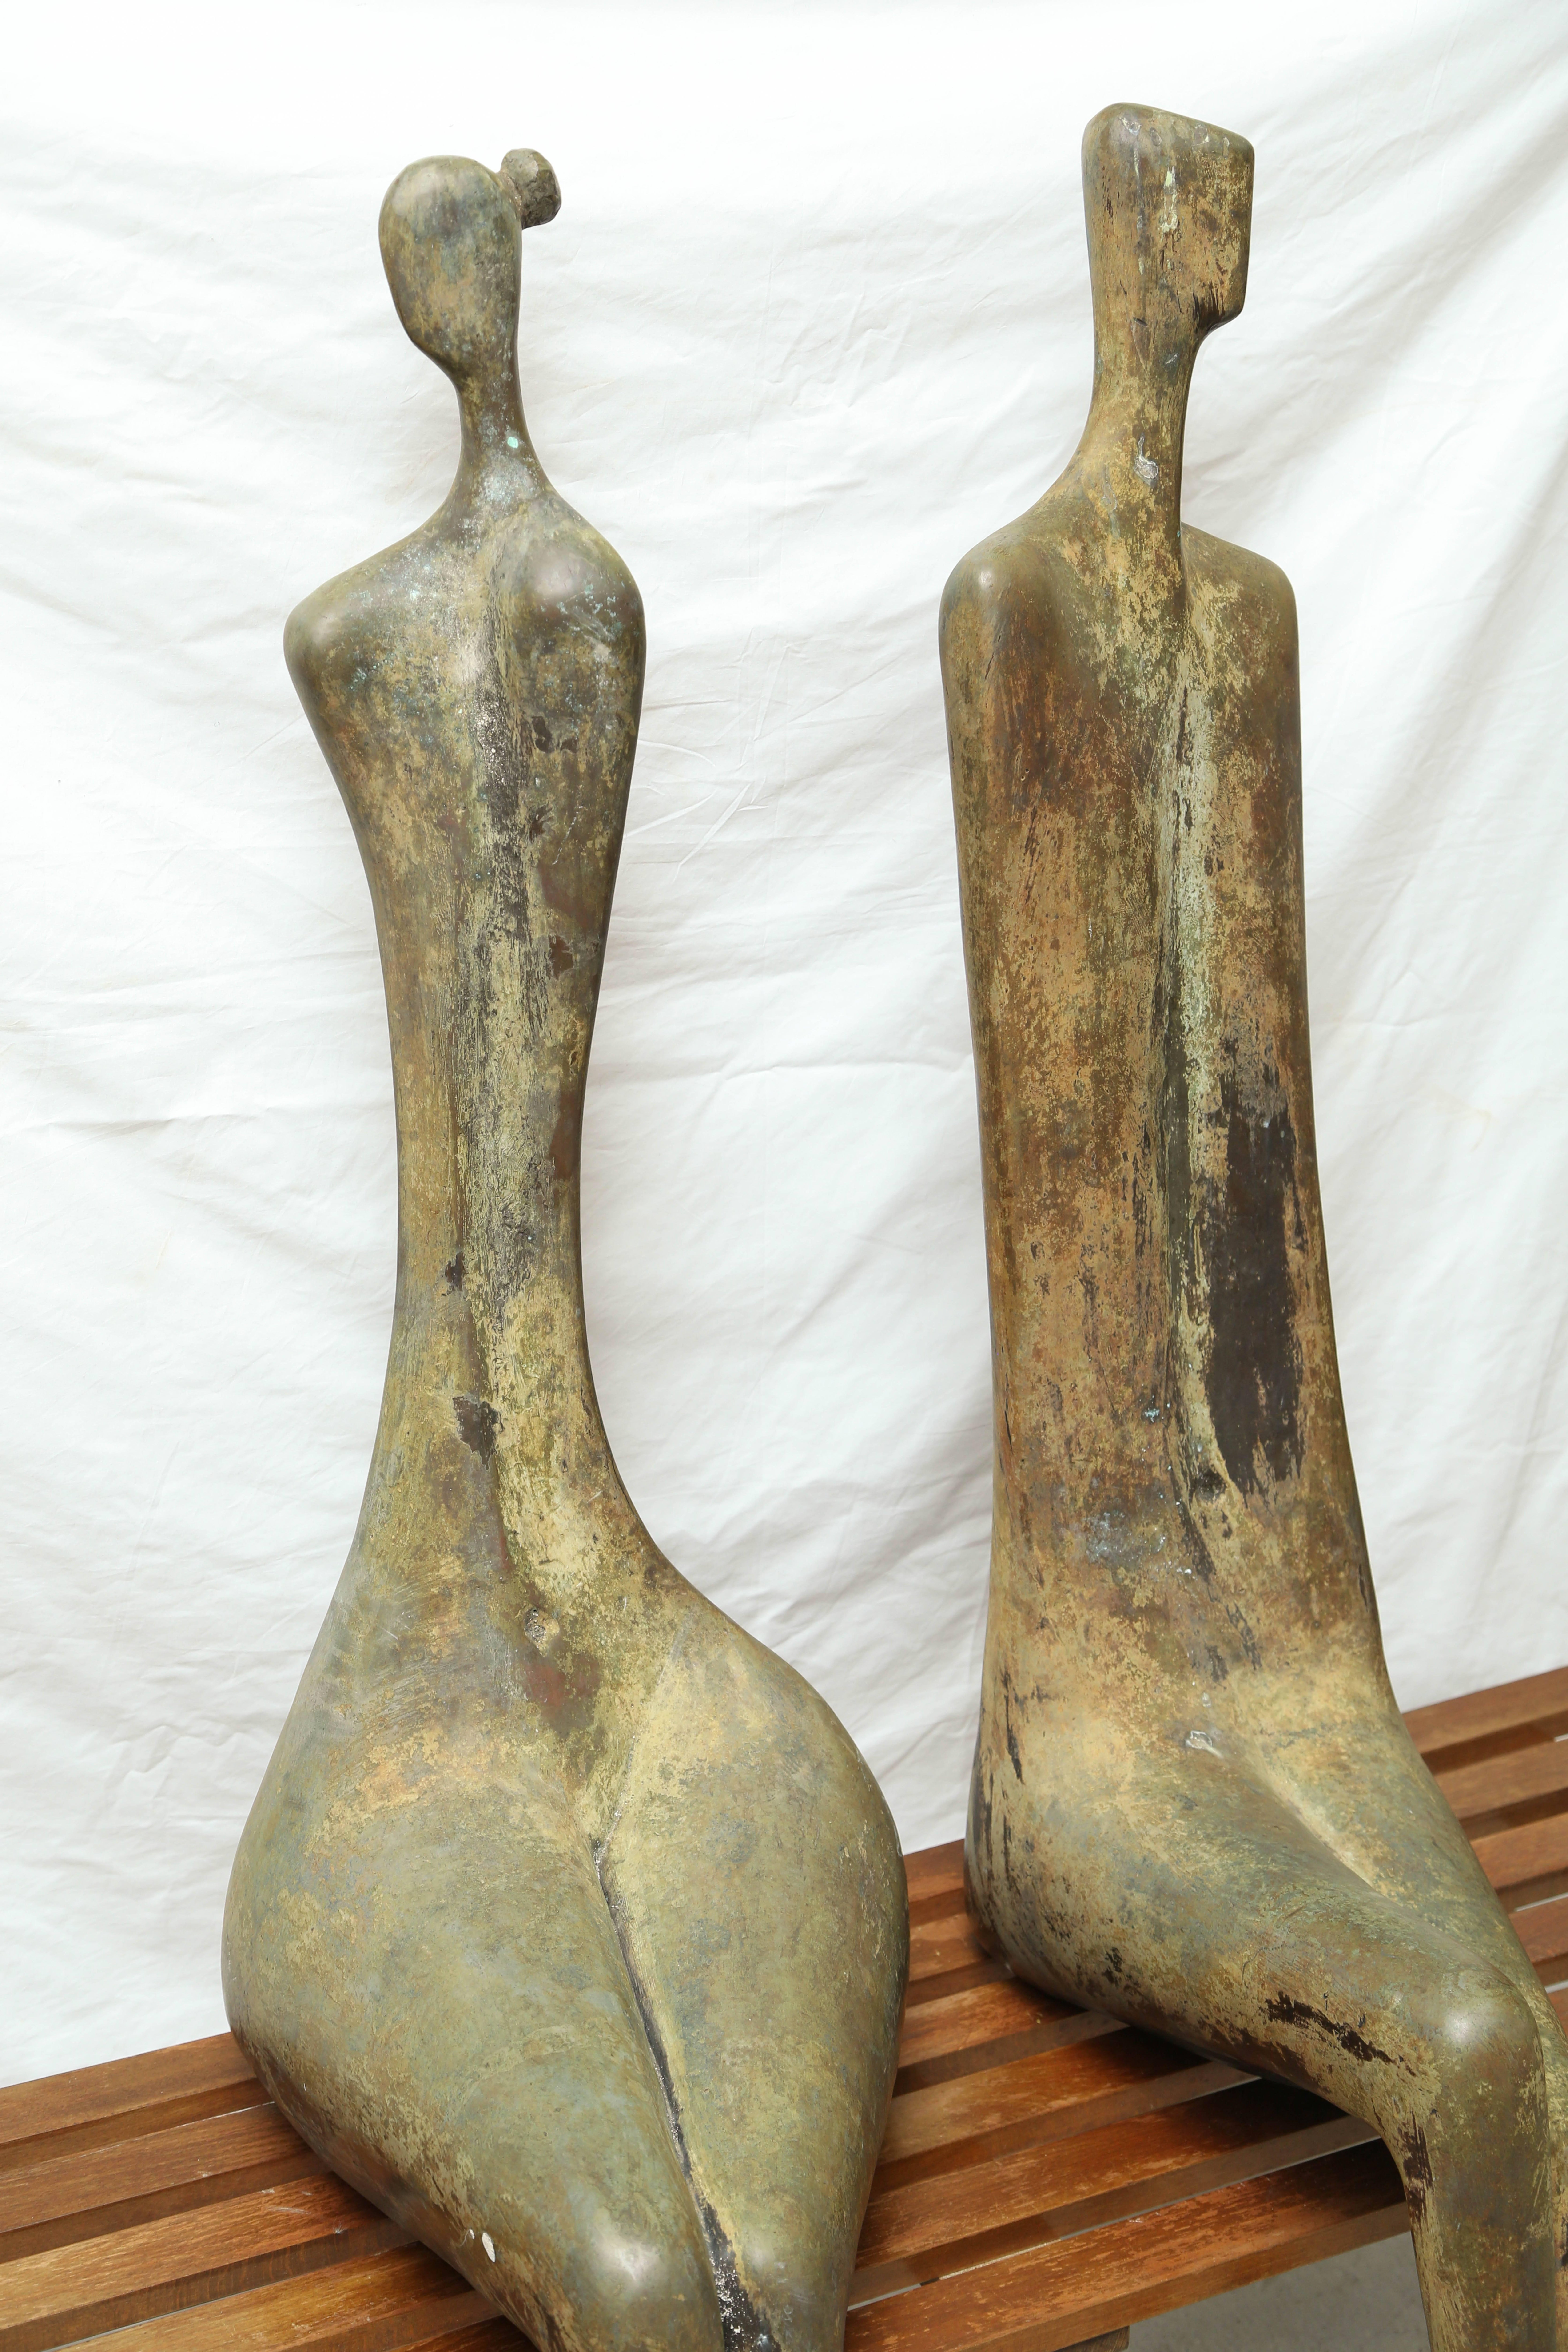 Bronze figures by Aharon Bezalel (1925-2012), a sculpture who lived and worked in Jerusalem. He is well listed and his bronze figural sculptures can be seen in many public and private collections. However this pair is especially large in scale,